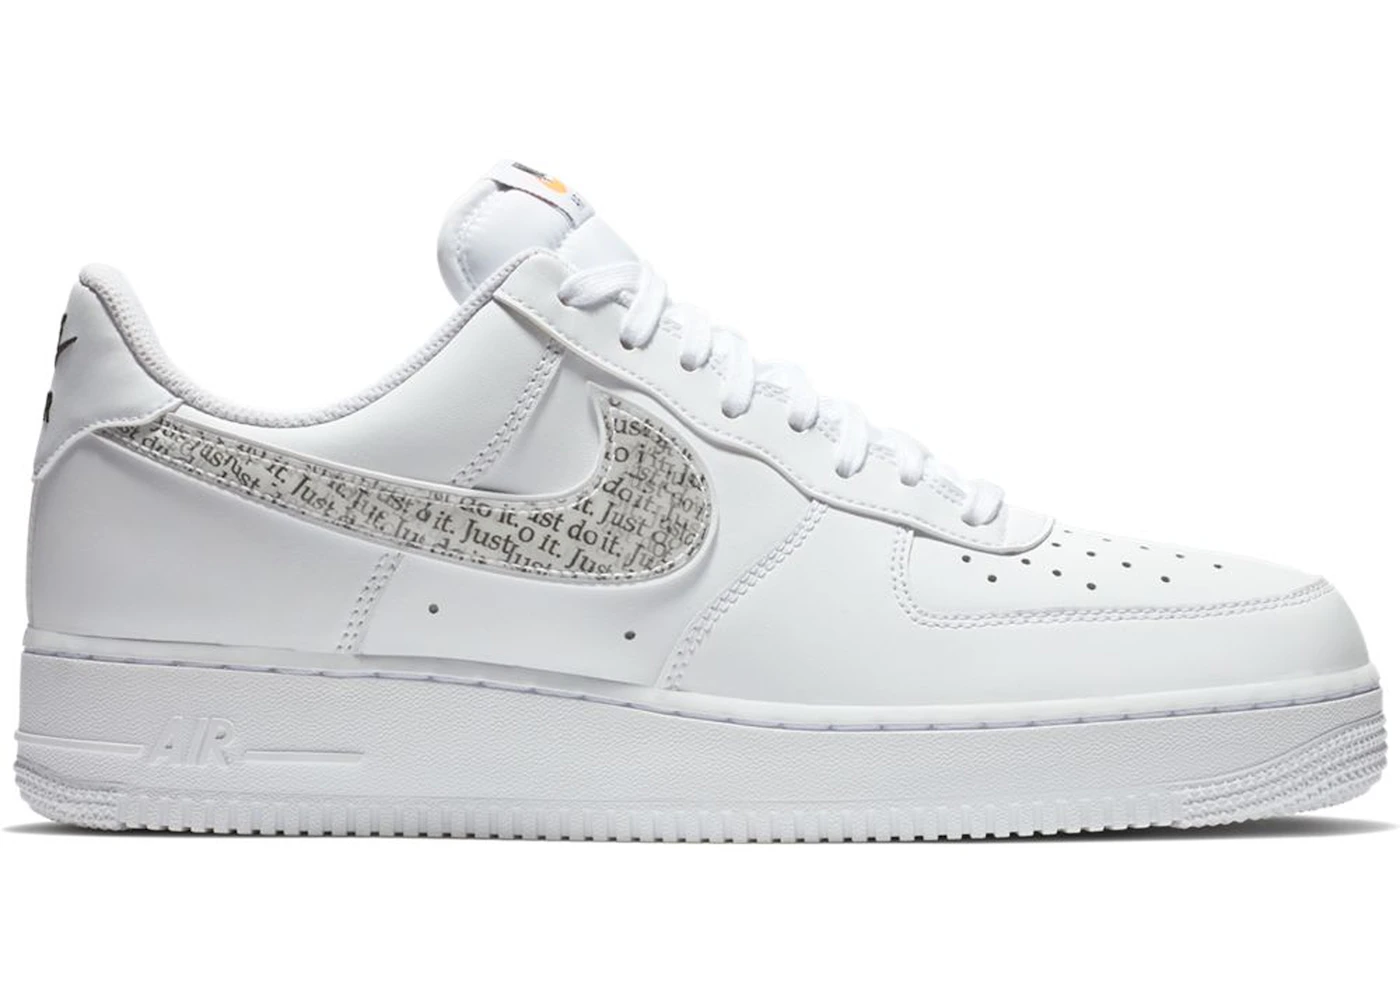 joyería Política Paraíso Nike Air Force 1 Low Just Do It Pack White Clear Men's - BQ5361-100 - US